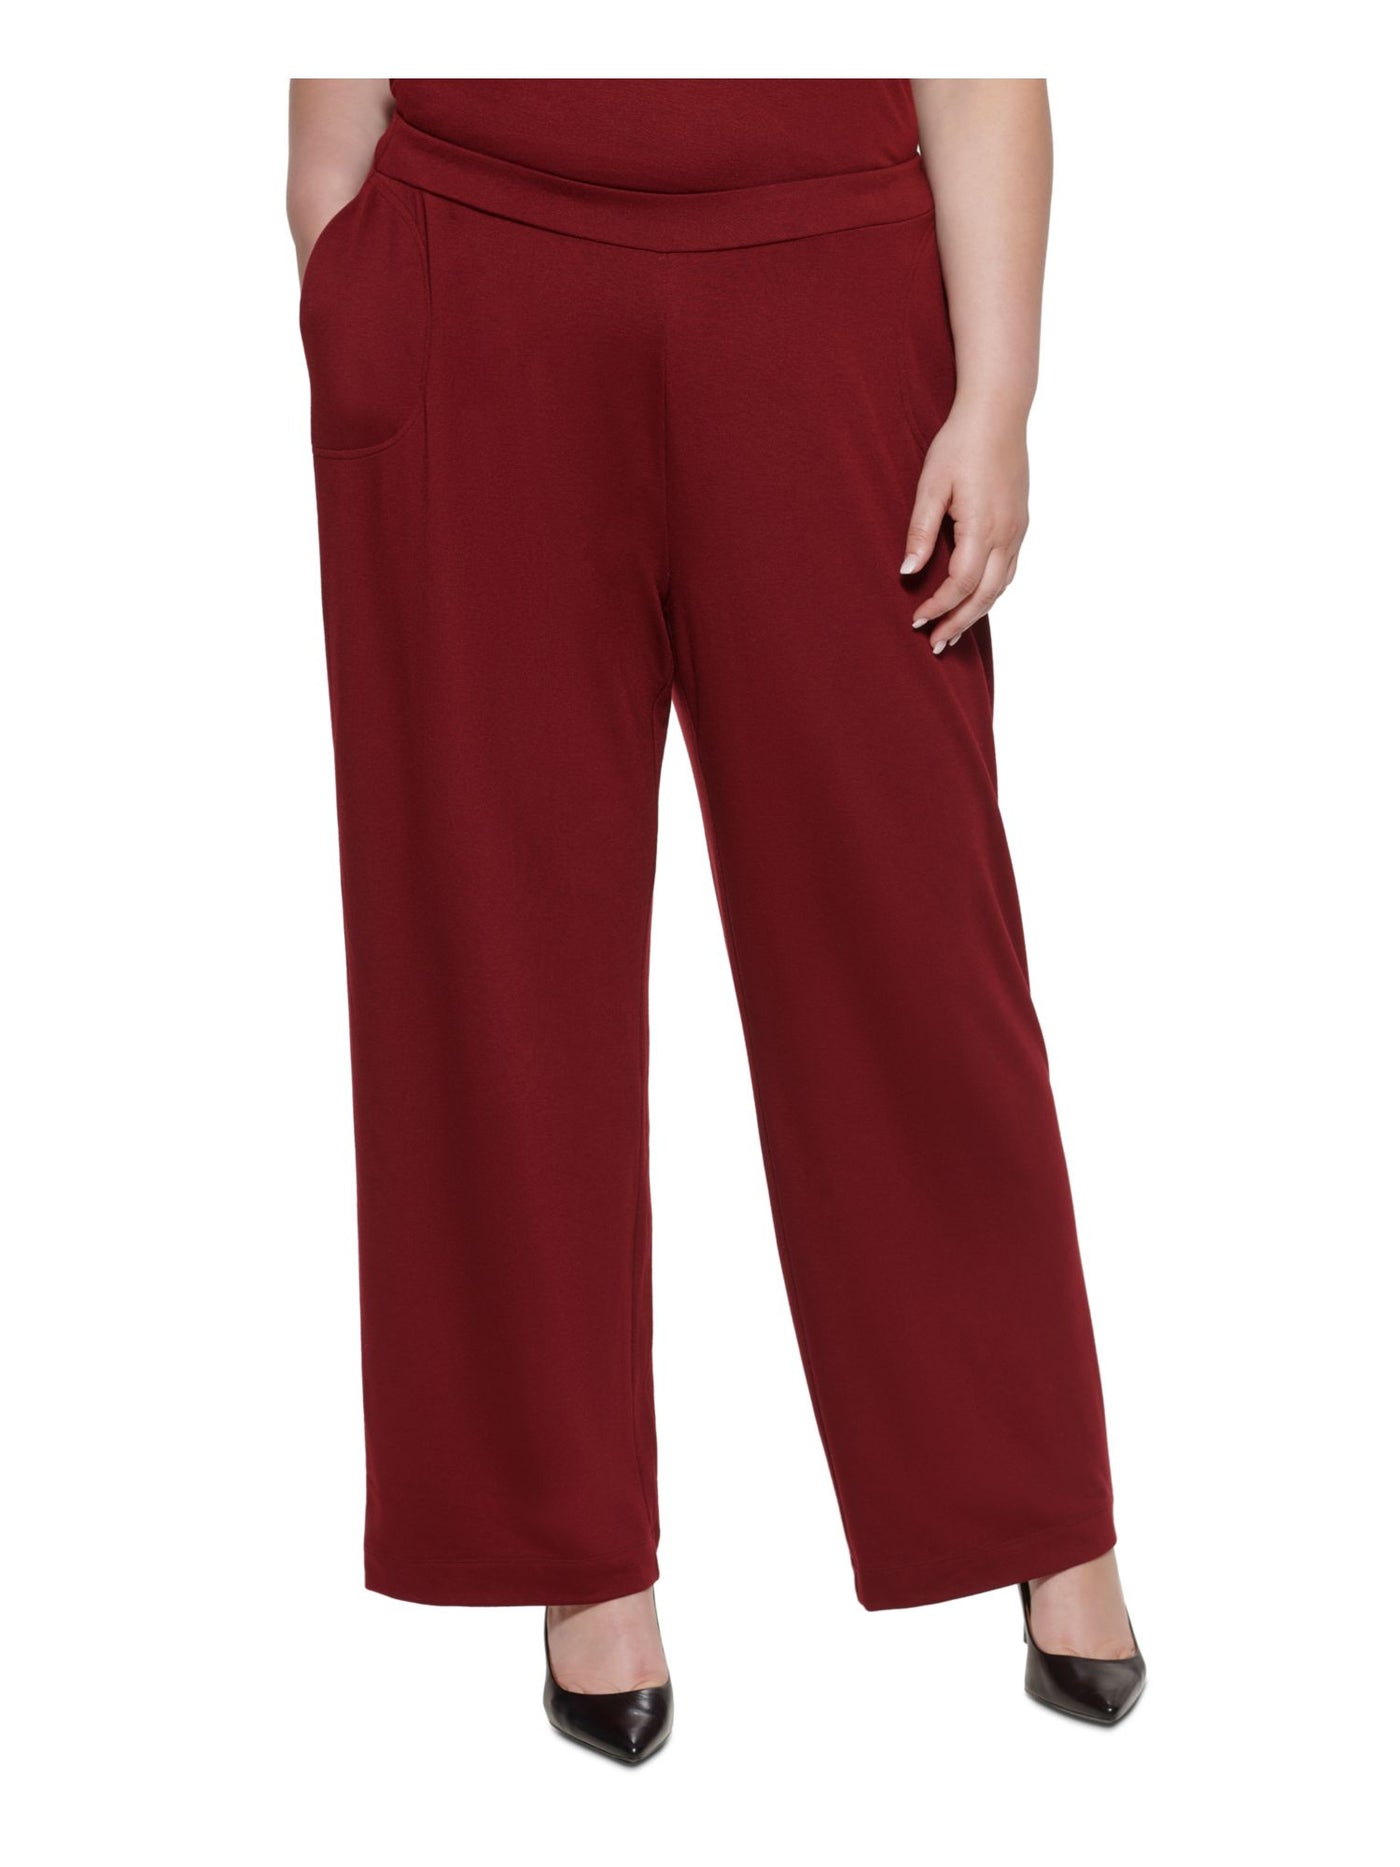 CALVIN KLEIN Womens Maroon Stretch Pocketed Wear To Work Straight leg Pants Plus 1X